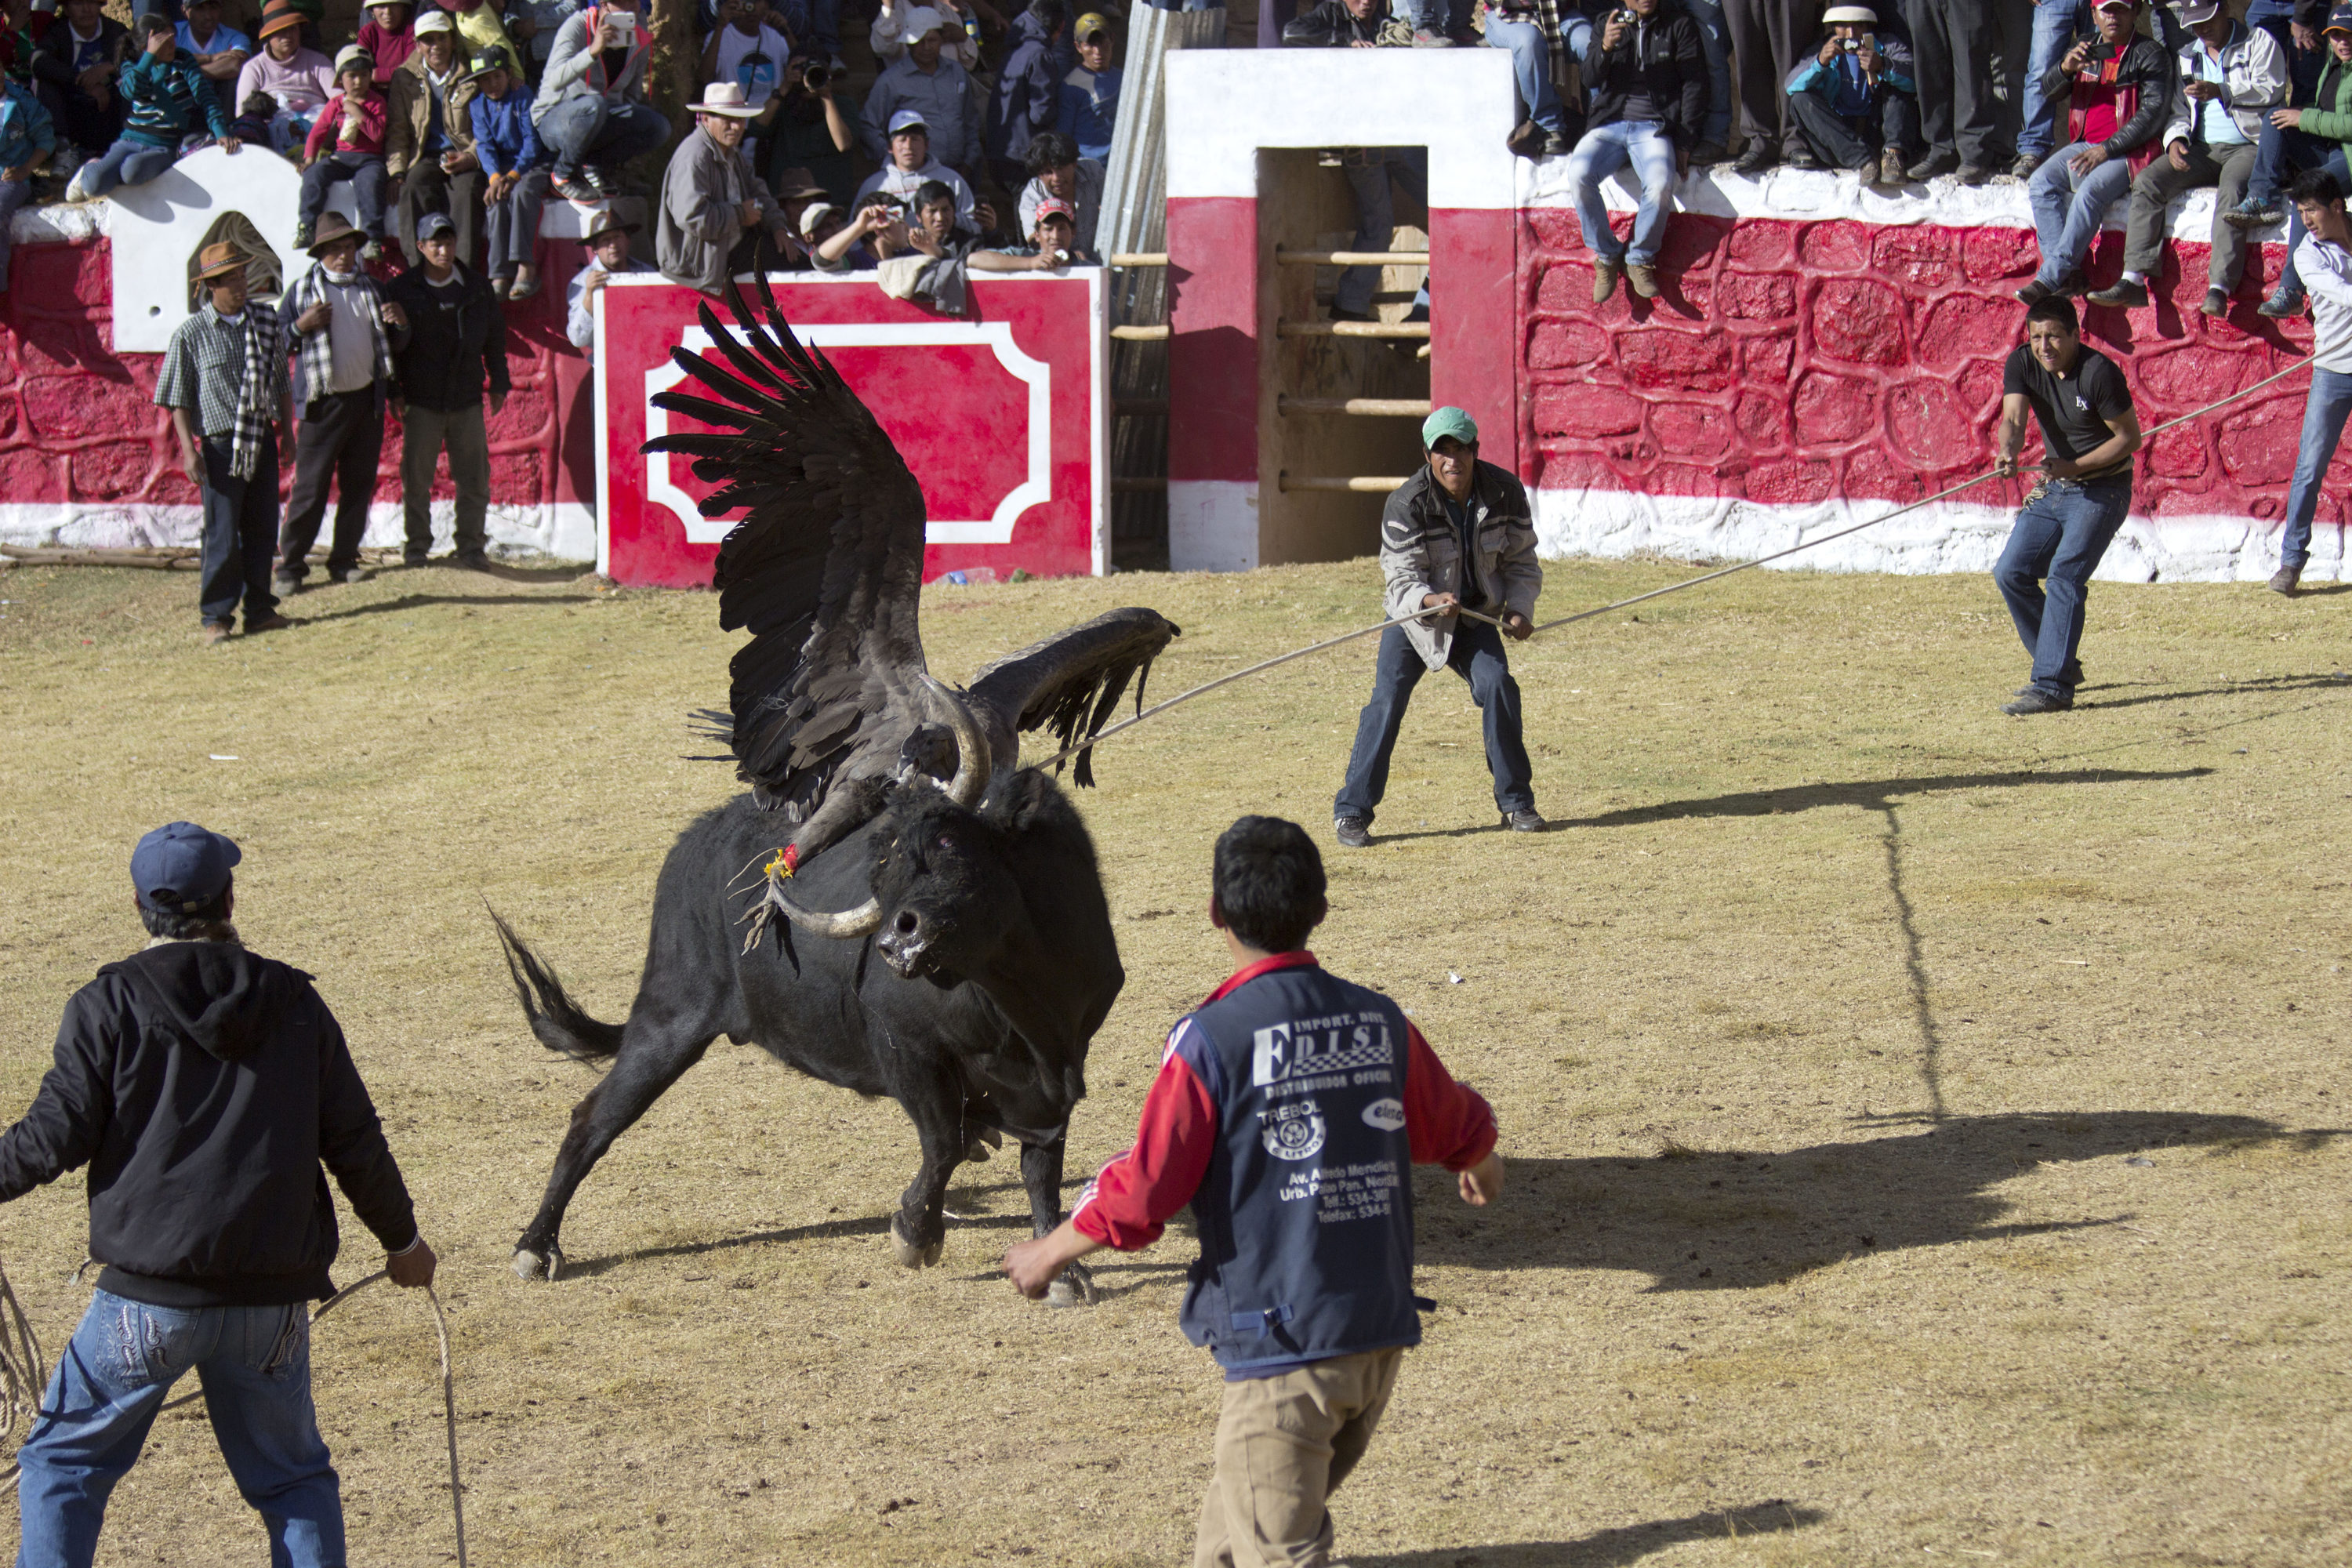 An Andean condor flaps its wings while tied to bull in a corral during the annual Yawar fiesta in Collorqui, Peru.